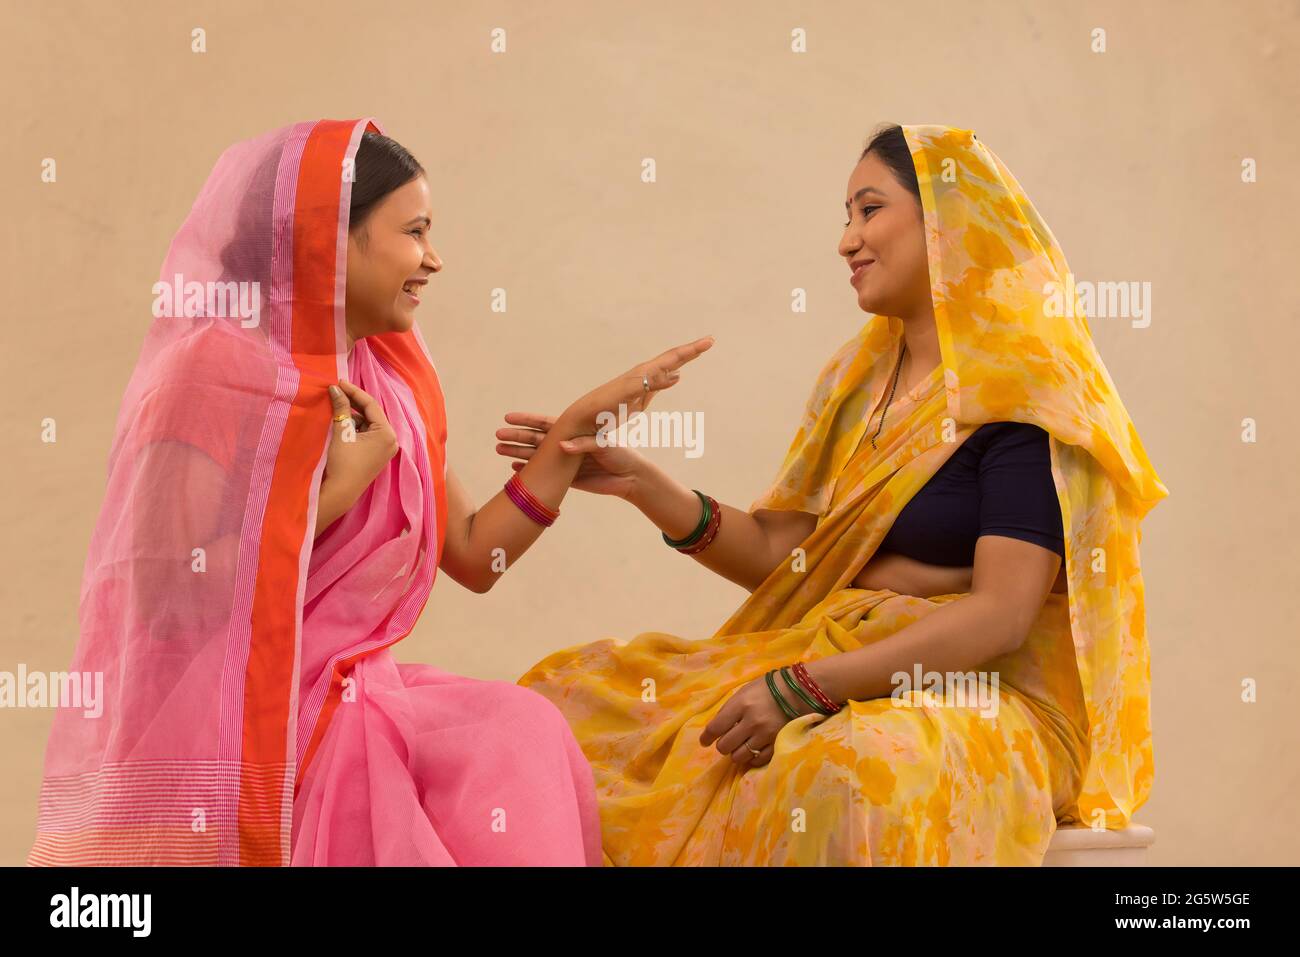 Two rural women talking to each other. Stock Photo